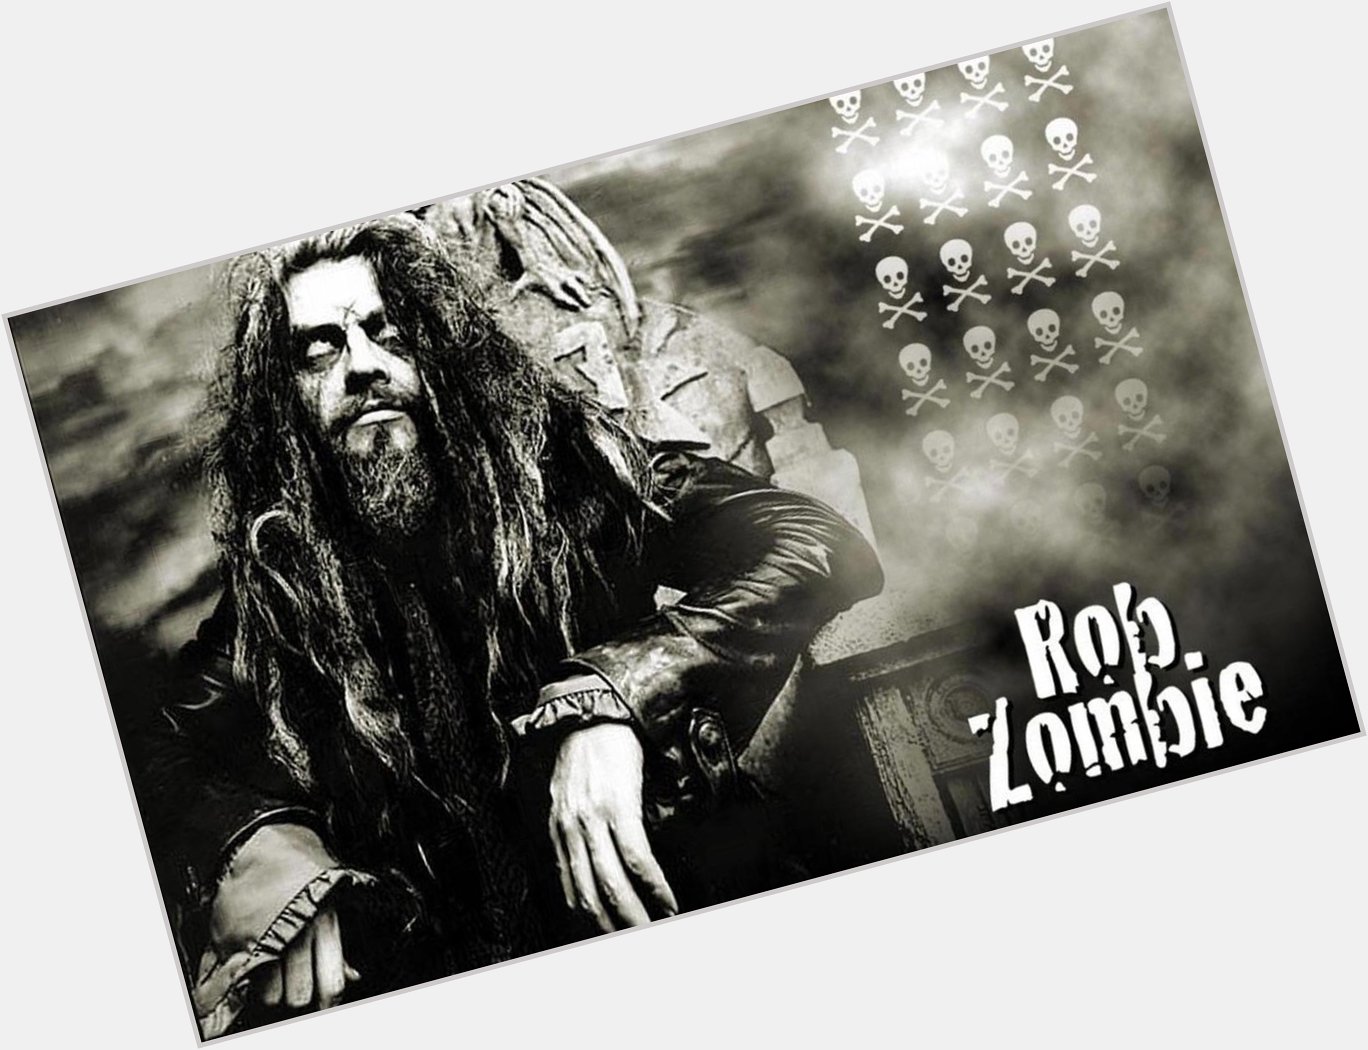 Happy birthday to Rob Zombie!!! Love his music and movies 